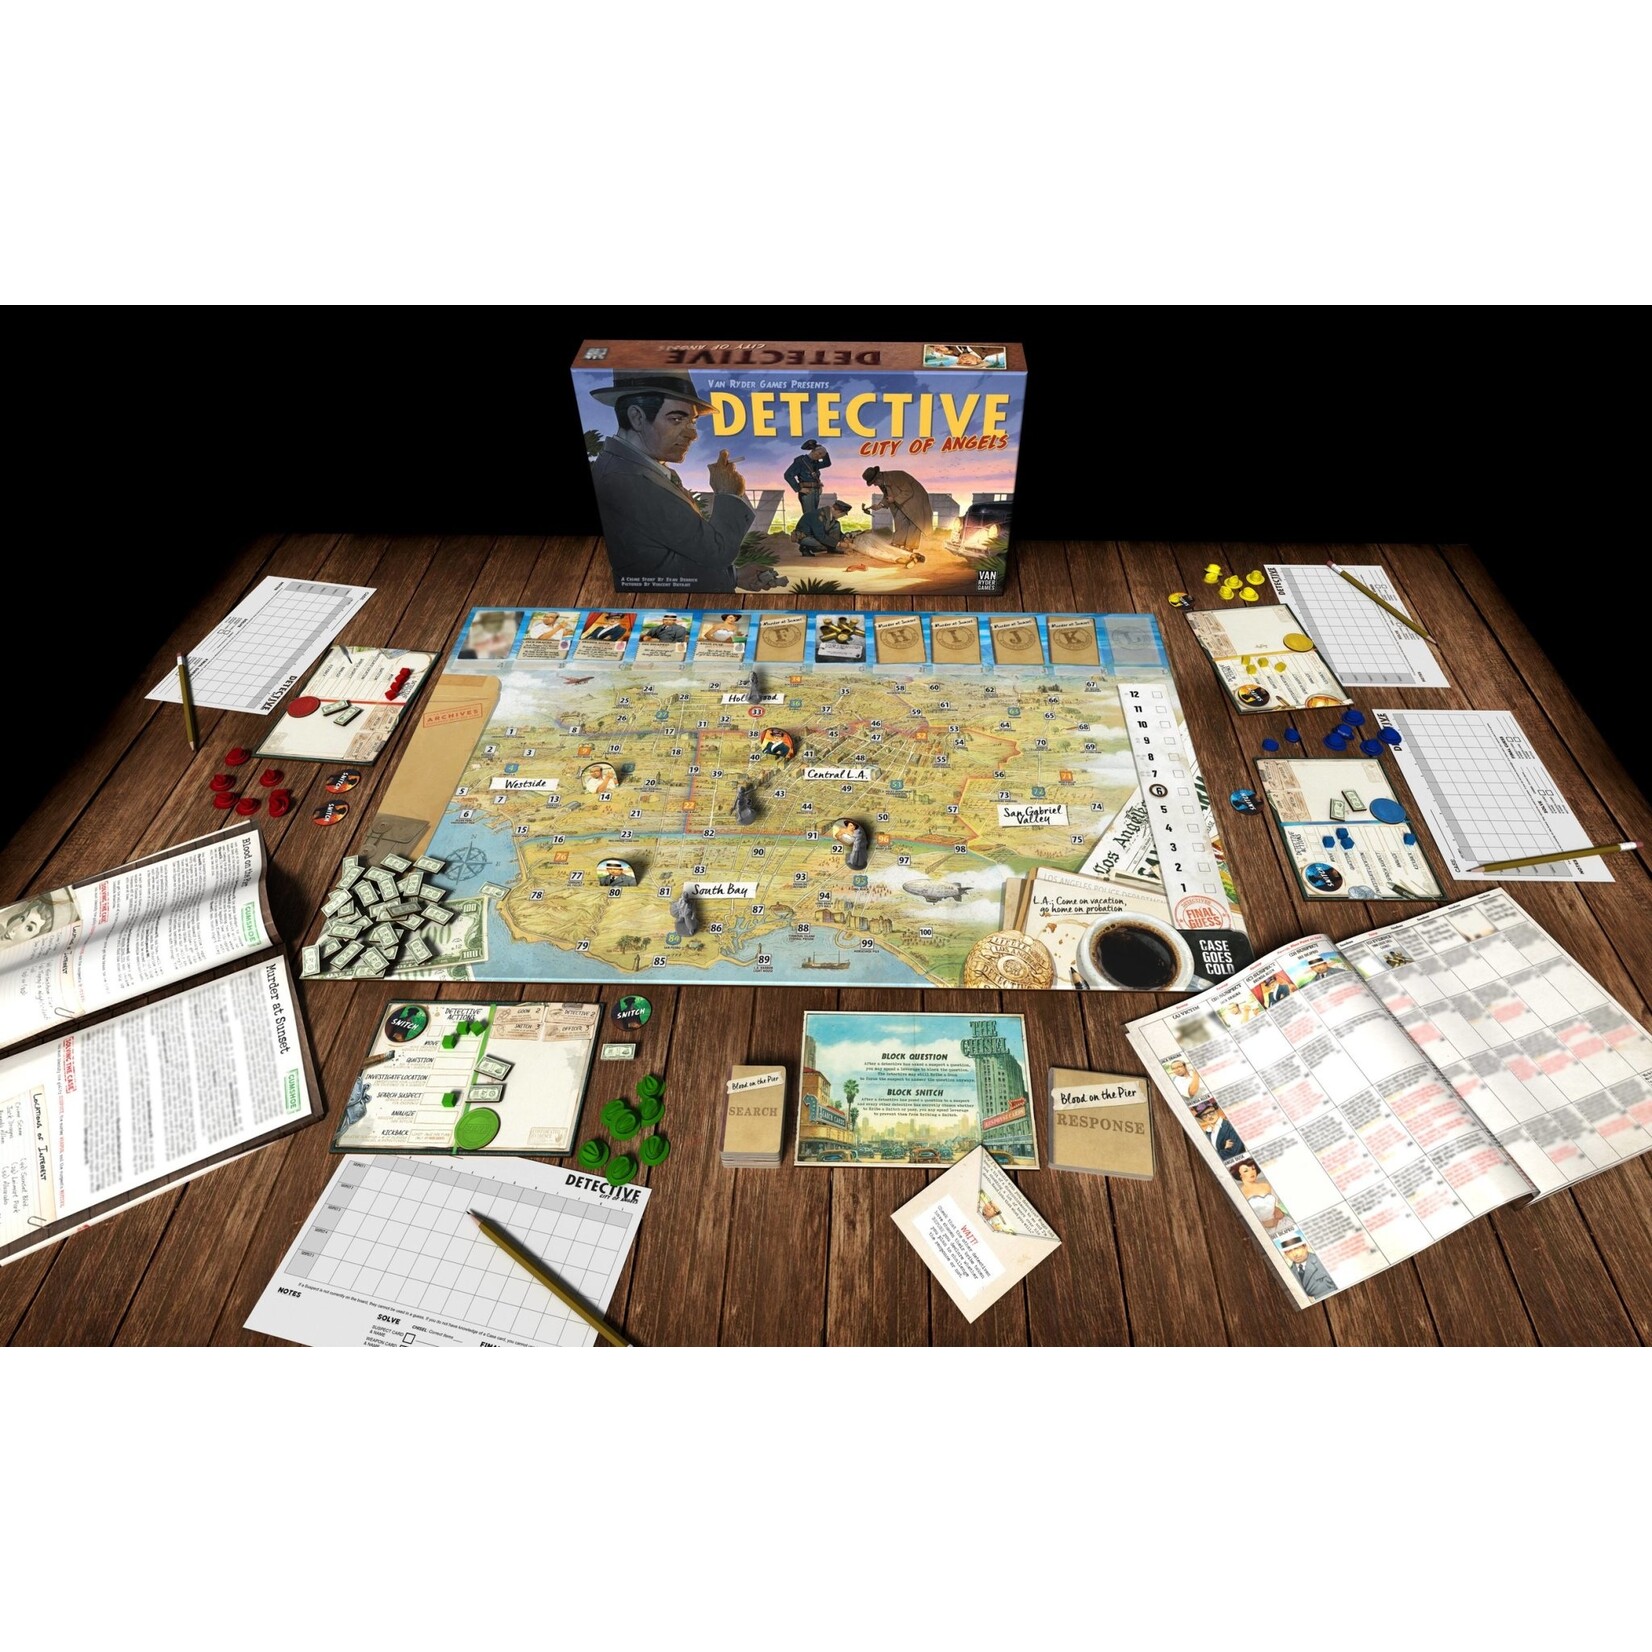 Detective - City of Angels Board Game